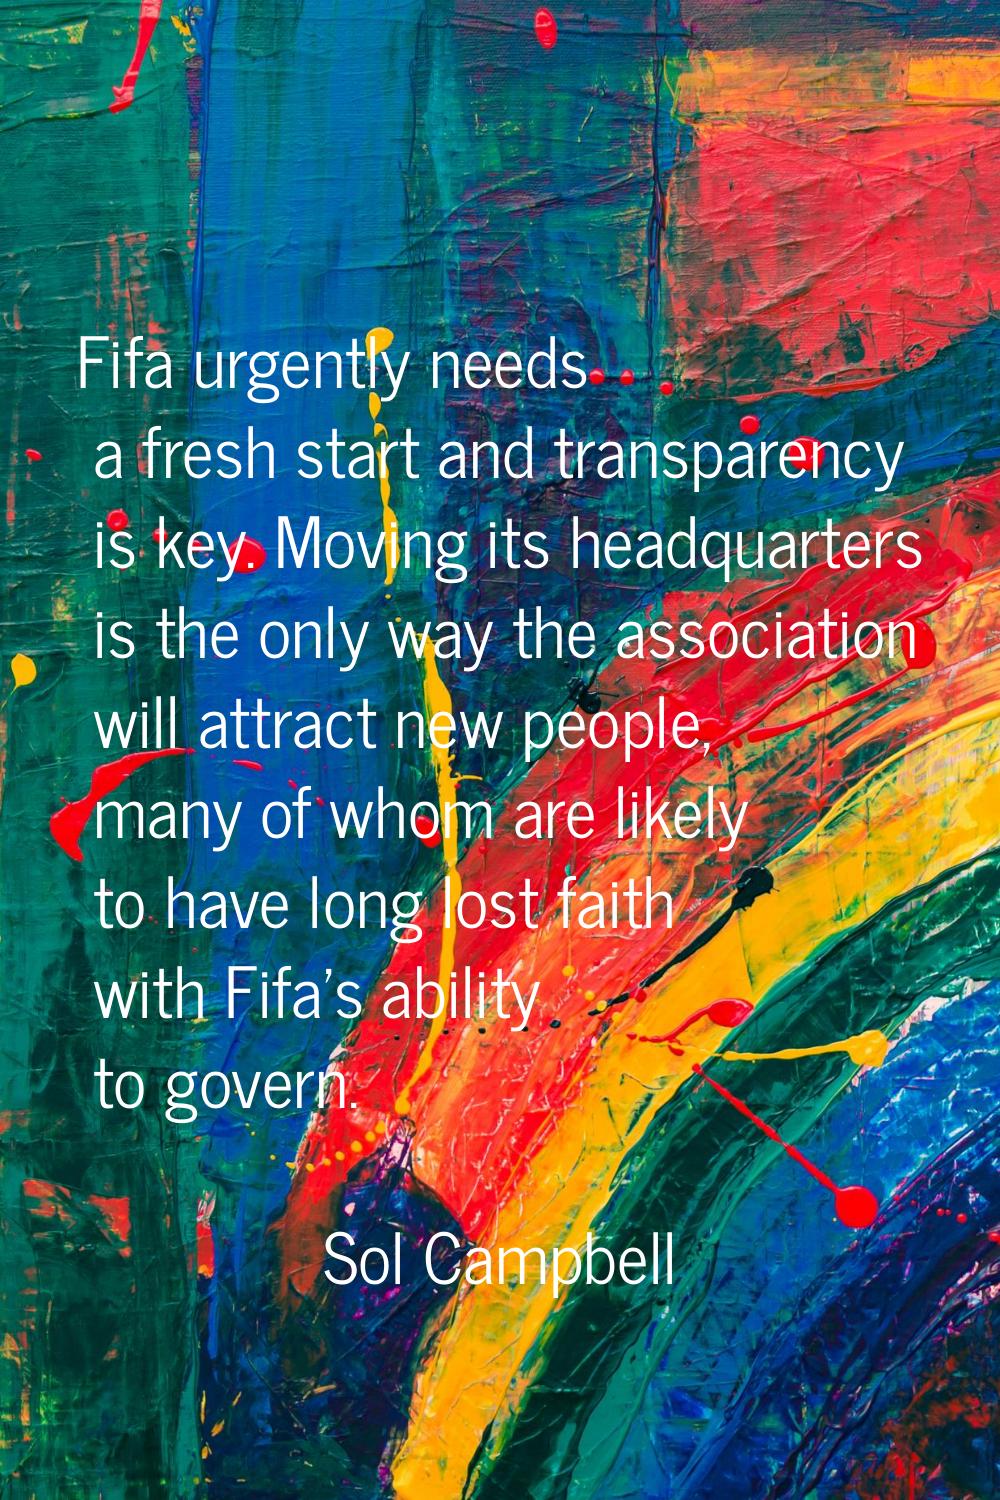 Fifa urgently needs a fresh start and transparency is key. Moving its headquarters is the only way 